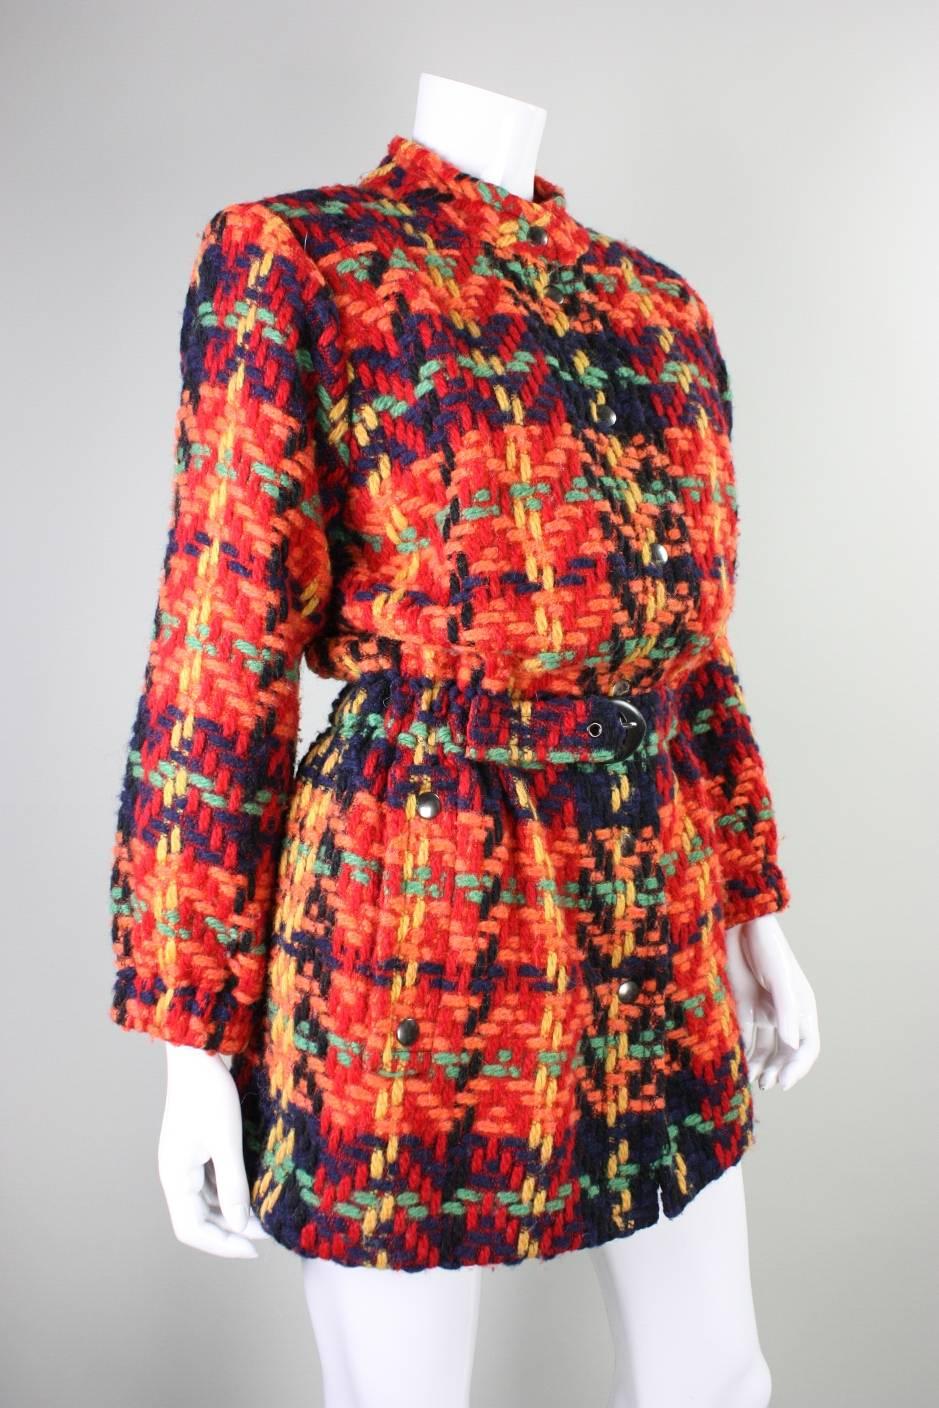 Fabulous jacket/coat from Yves Saint Laurent likely dates to the 1990's and is made of brightly-colored yarn that is woven in plaid tweed manner.  Center front snap closures.  Elasticized waist and cuffs.  Center front buckle closure at the waist. 